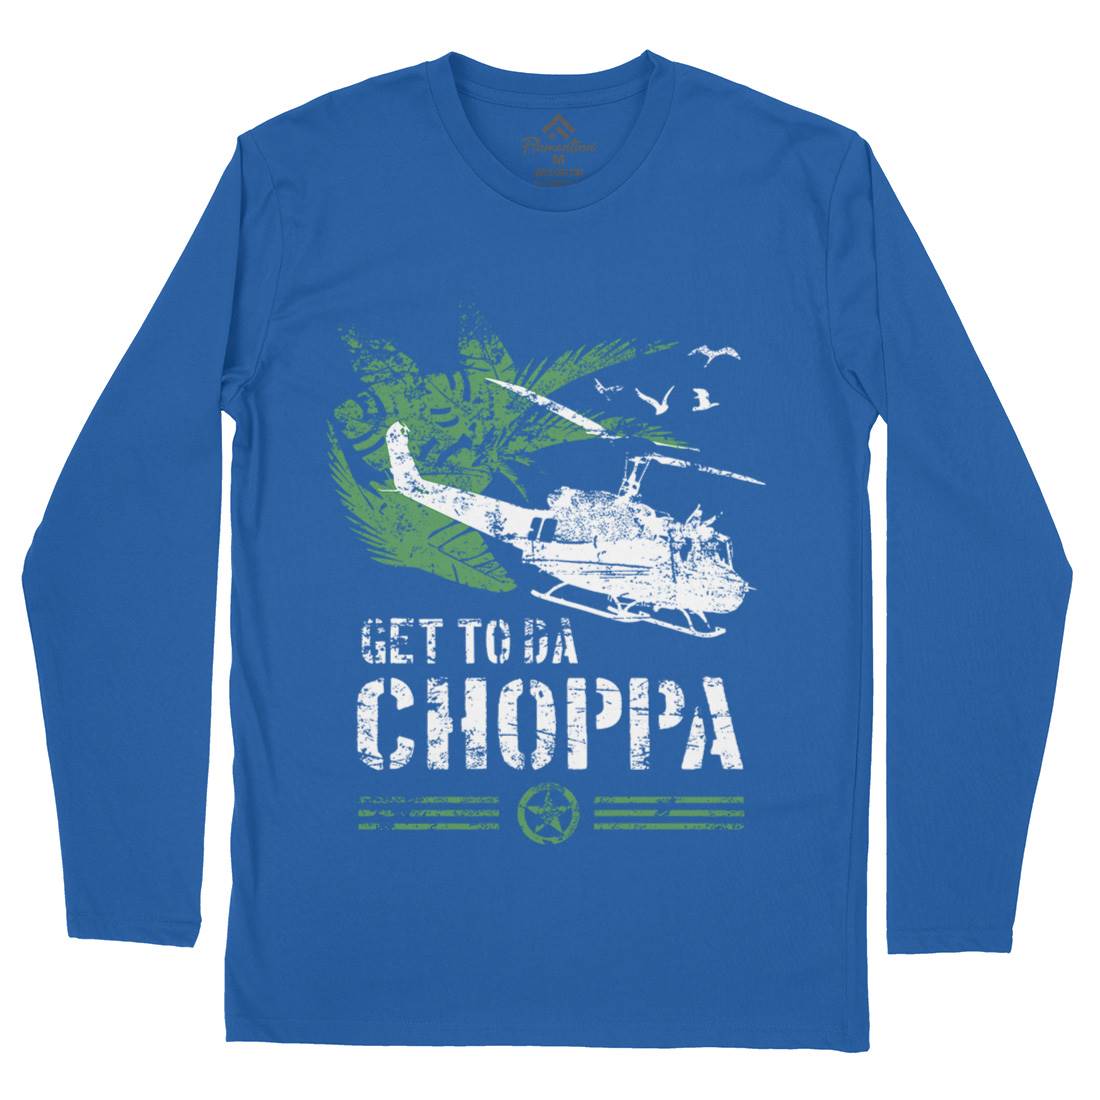 Get To The Chopper Mens Long Sleeve T-Shirt Army D235